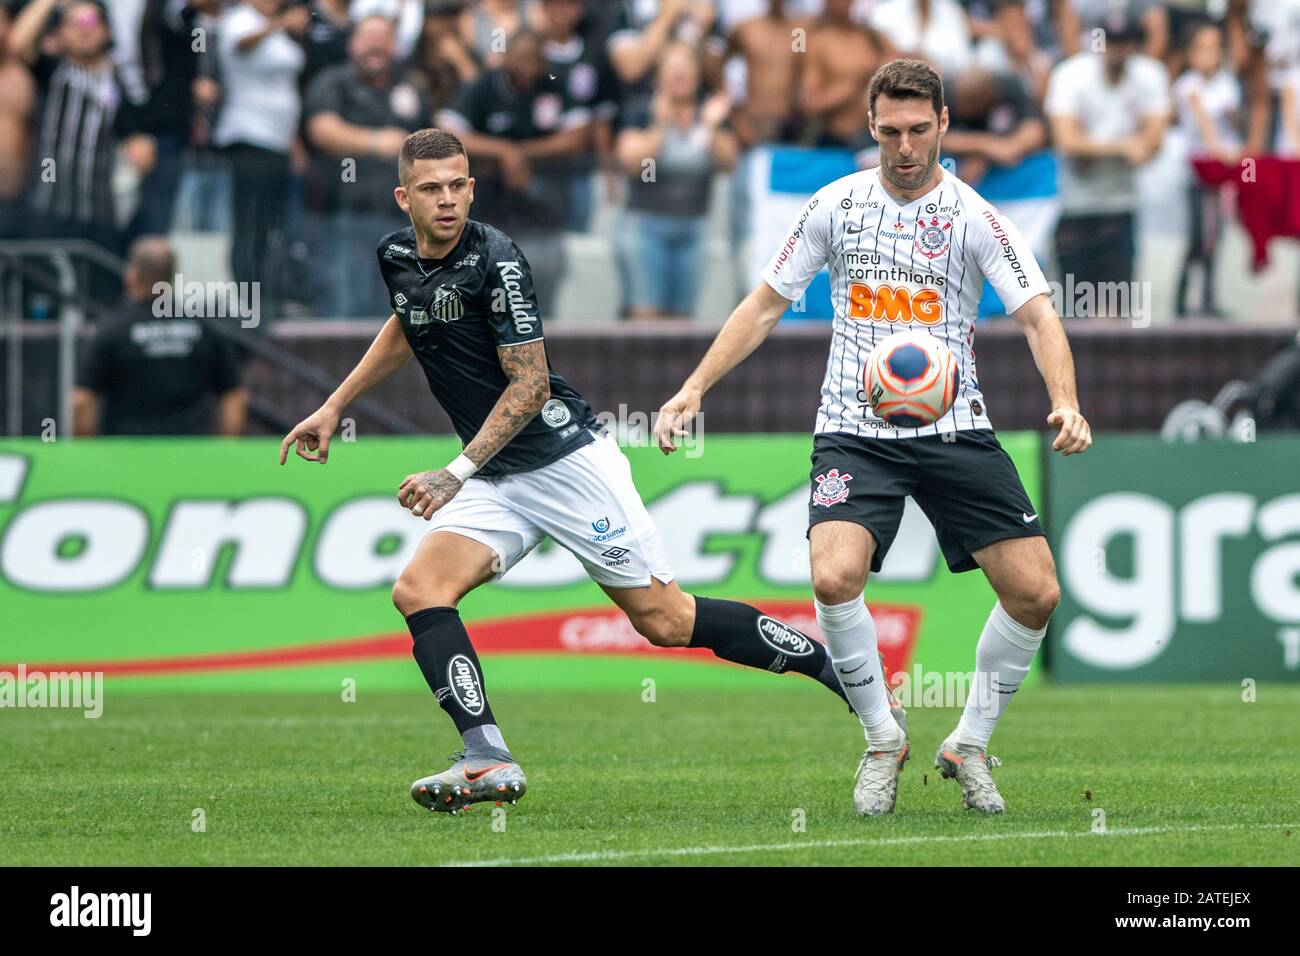 Sao Paulo Sp 02 02 Corinthians X Santos Boselli From Corinthians During The Game Between Corinthians And Santos Held At Arena Corinthians In Sao Paulo Sp The Match Is Valid For